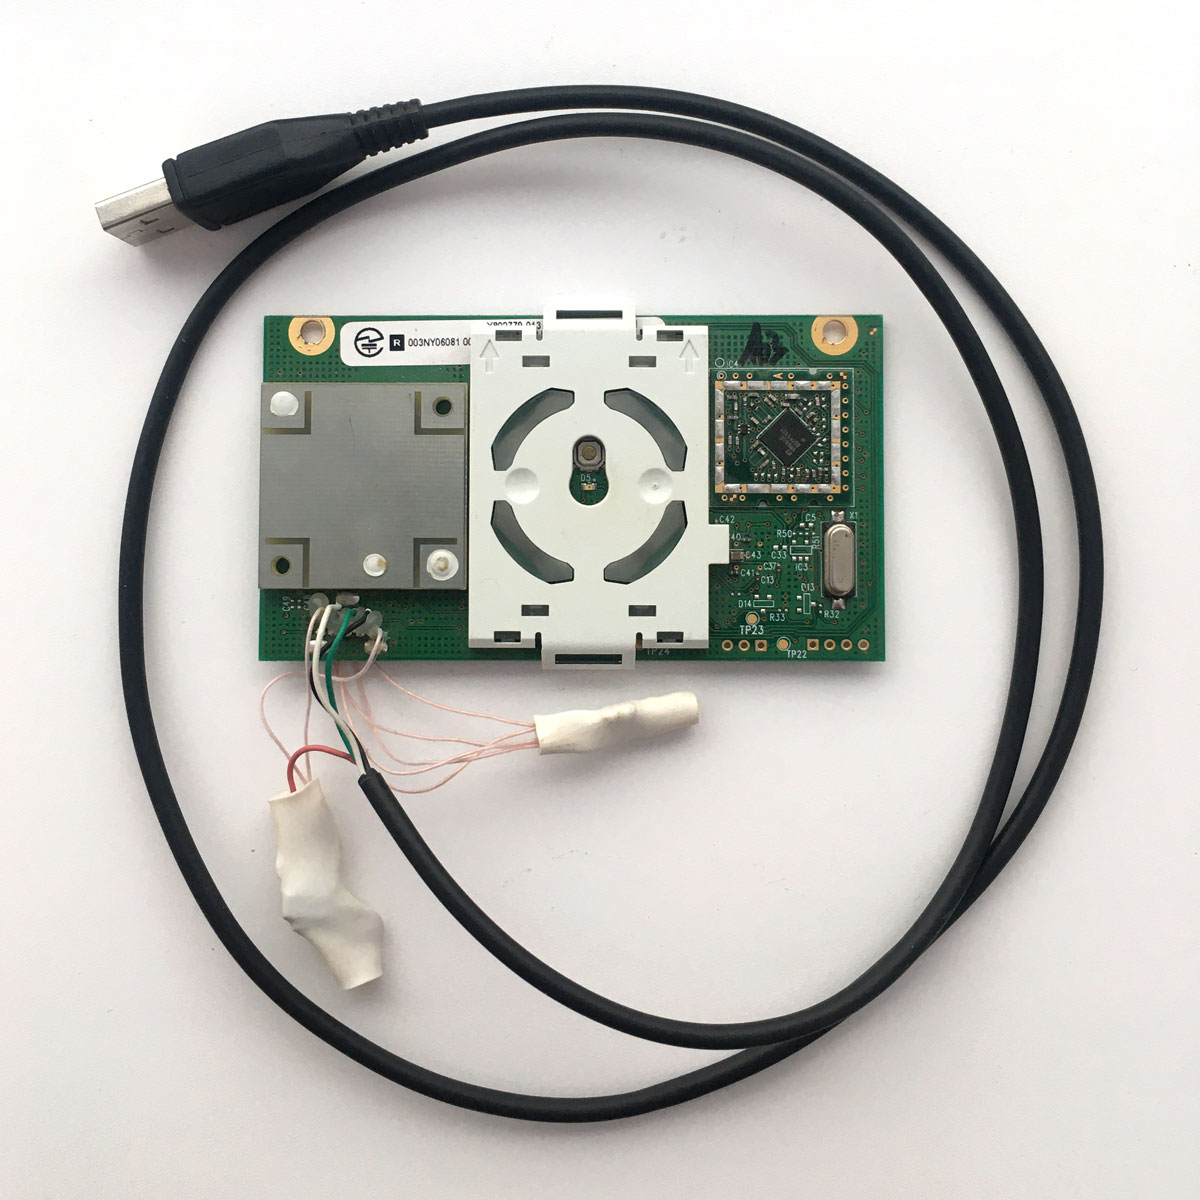 Building a Wireless Receiver for Xbox 360 Controllers From a Broken Xbox 360  Console - Artem Garmash